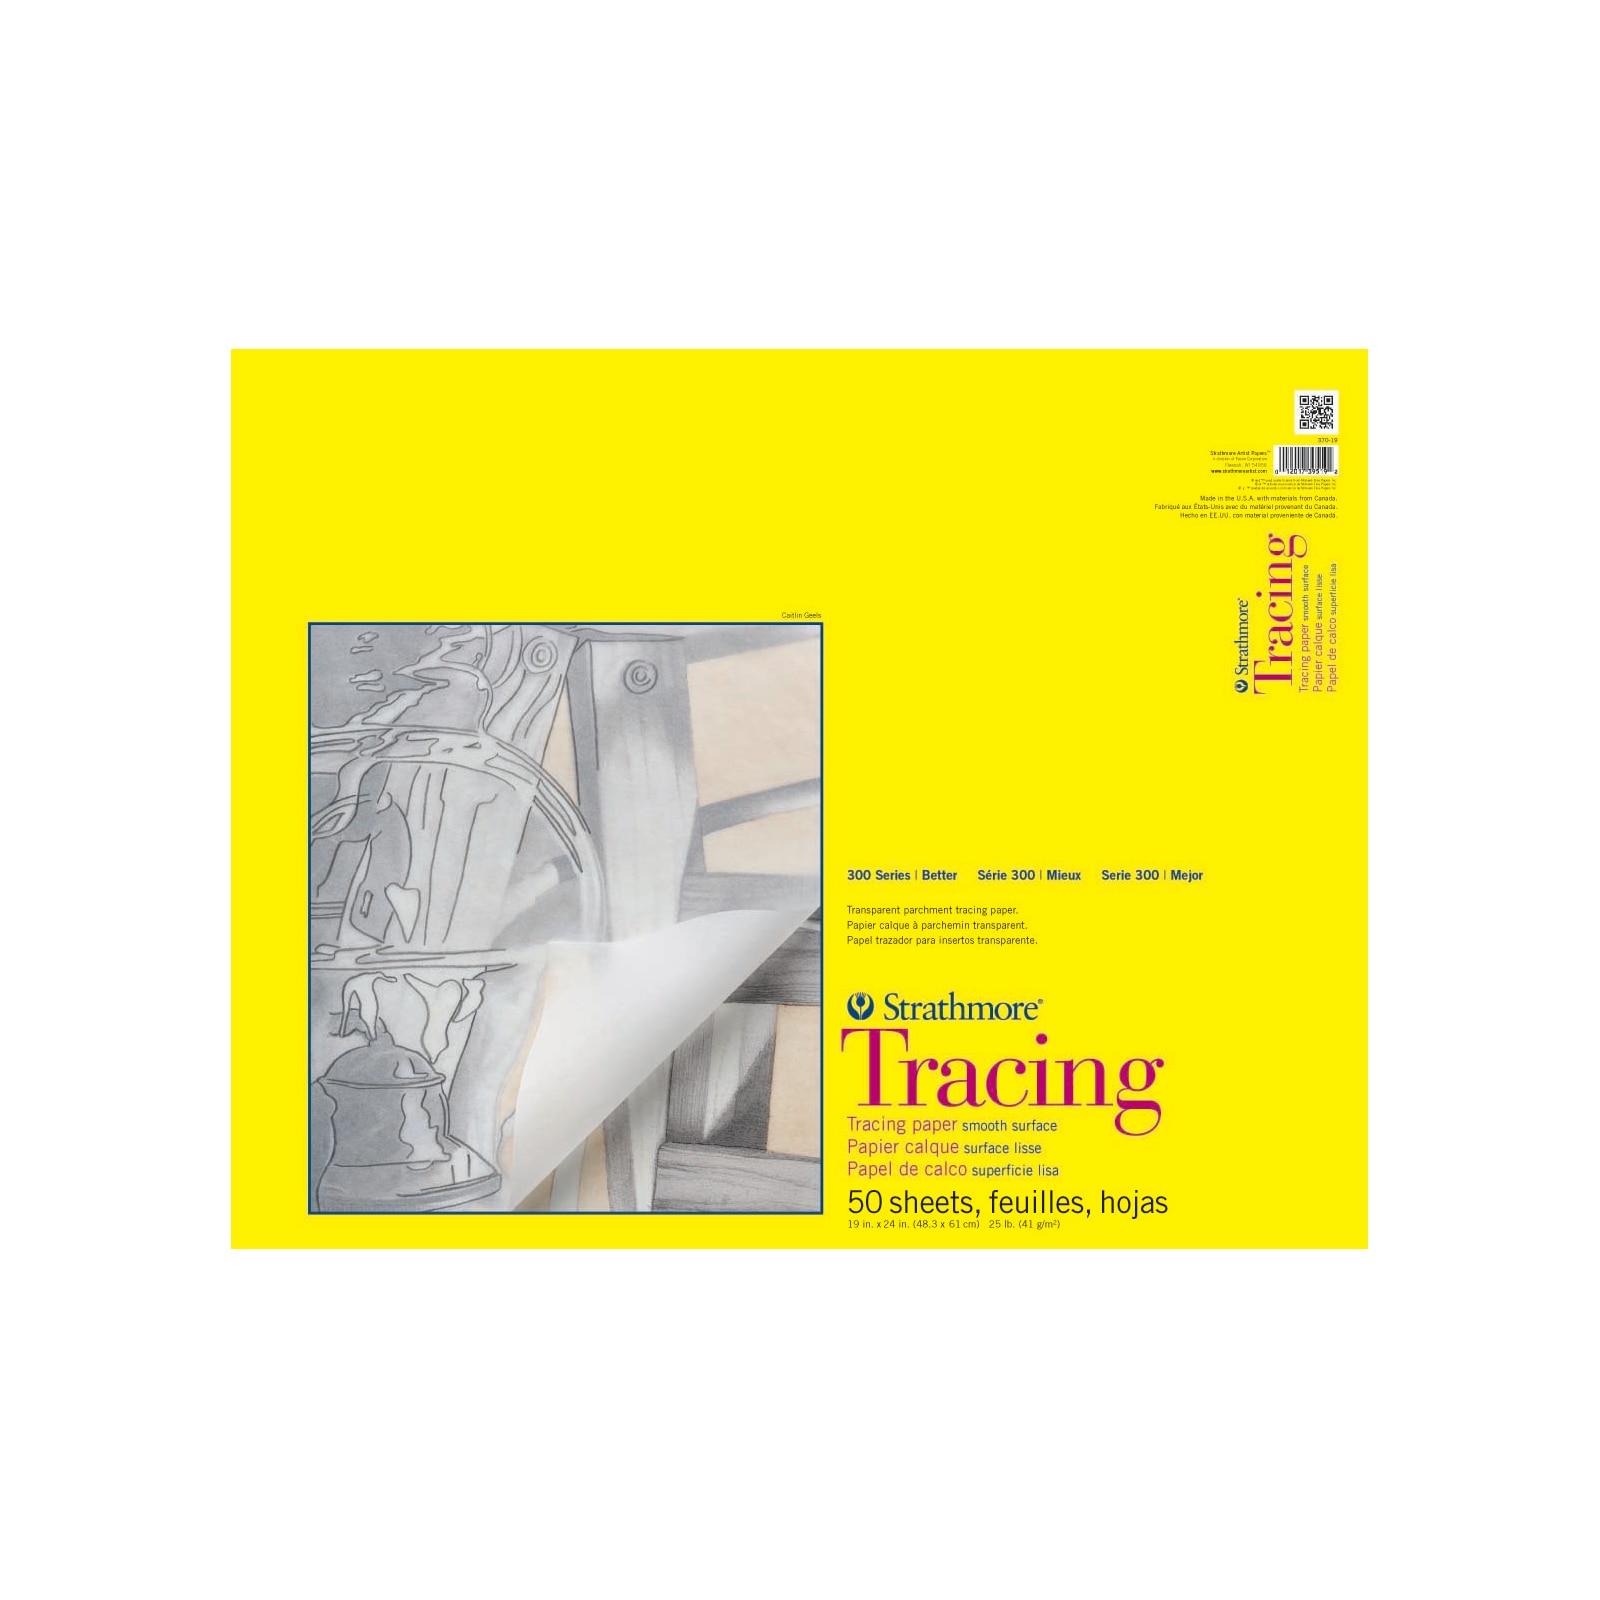 Strathmore Tracing Paper Pad, 300 Series, 19" x 24"